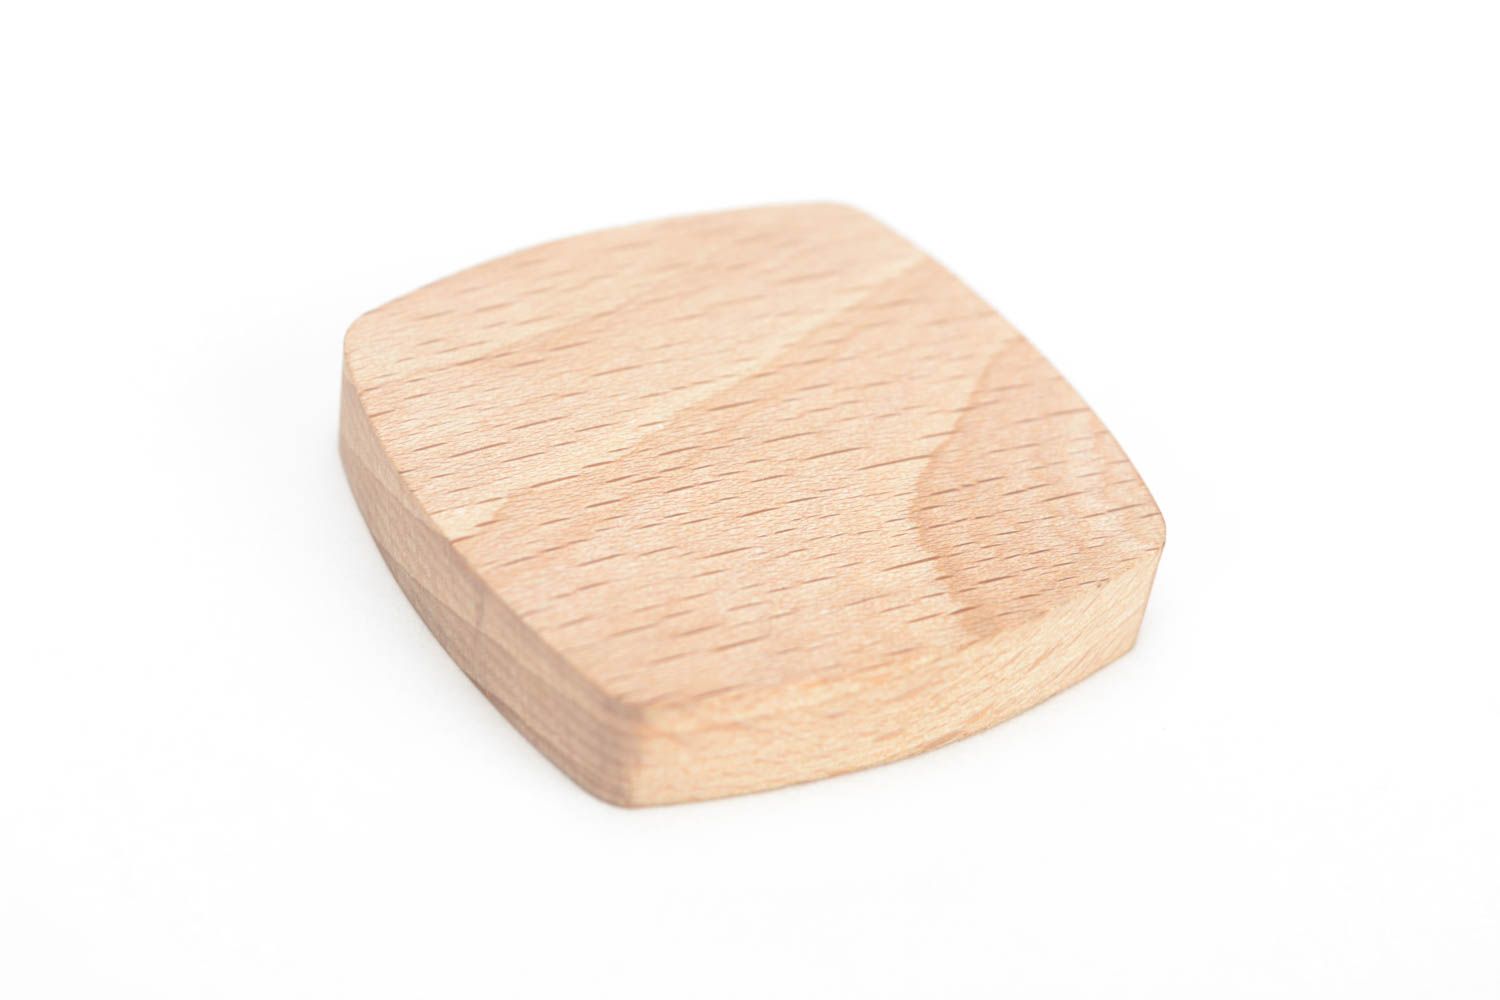 Unusual beautiful square wooden blank for jewelry making DIY accessories photo 3